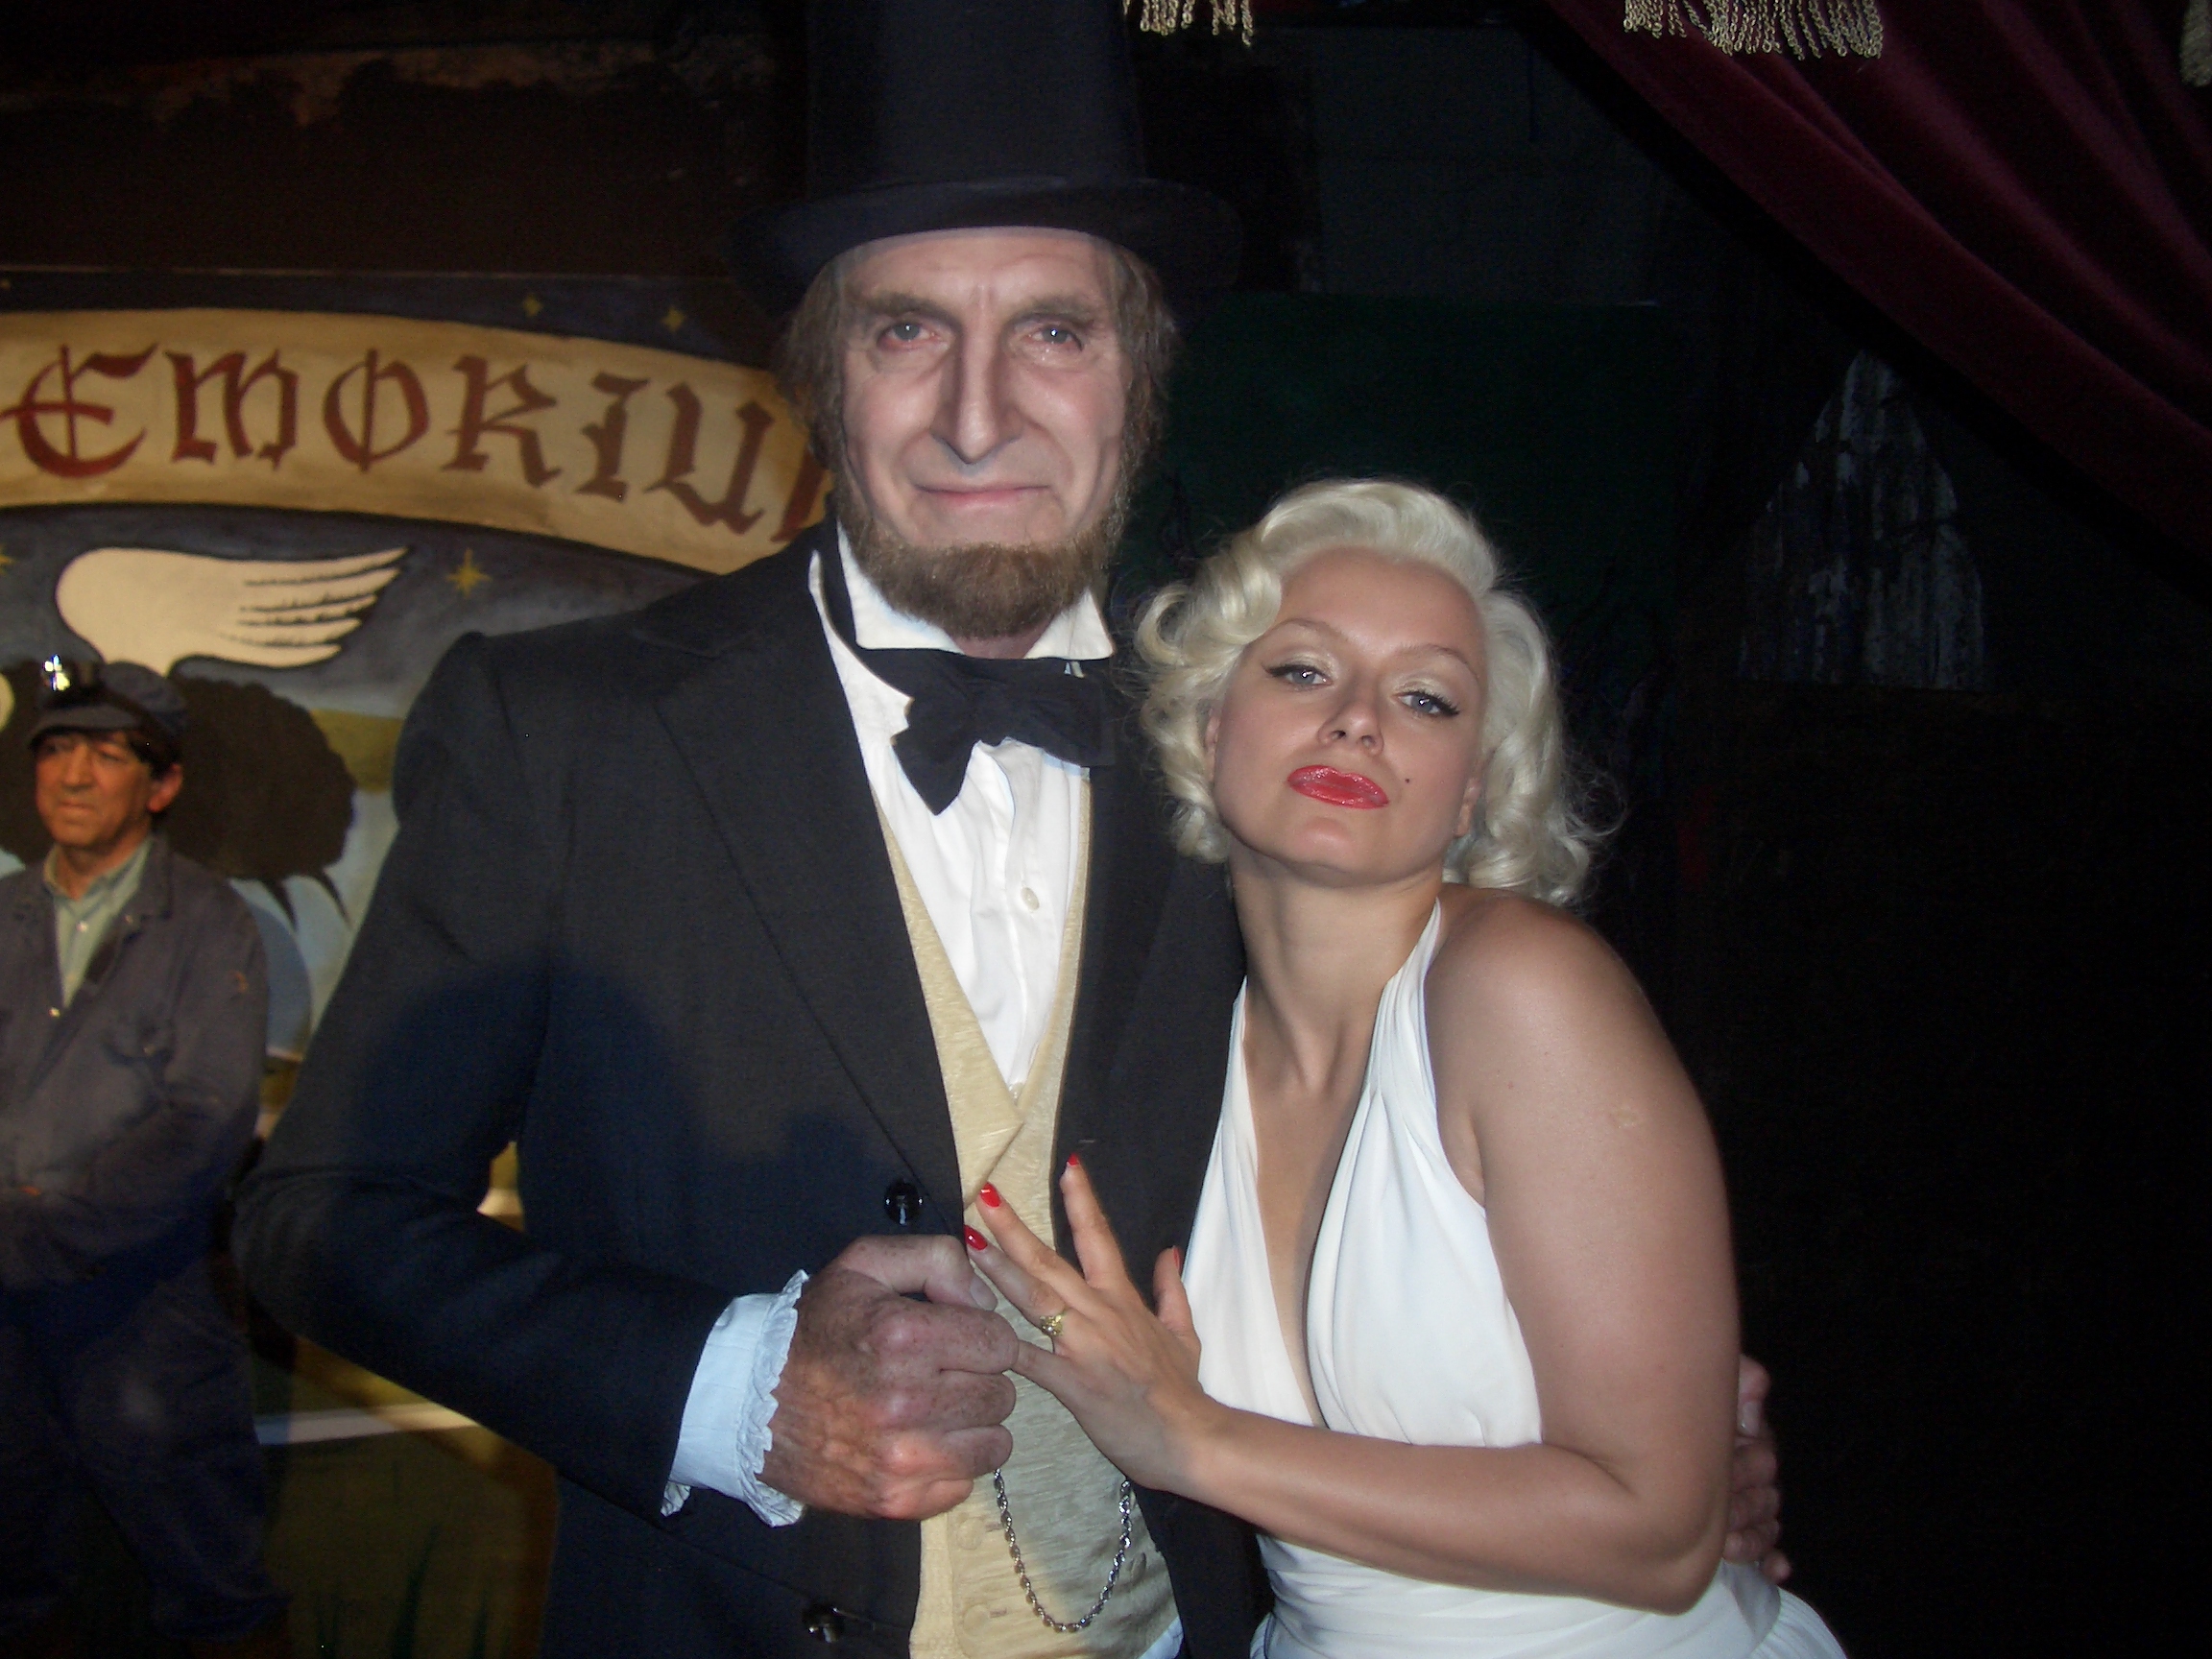 As Abe Lincoln with Samantha Morton in Harmony Korine's 